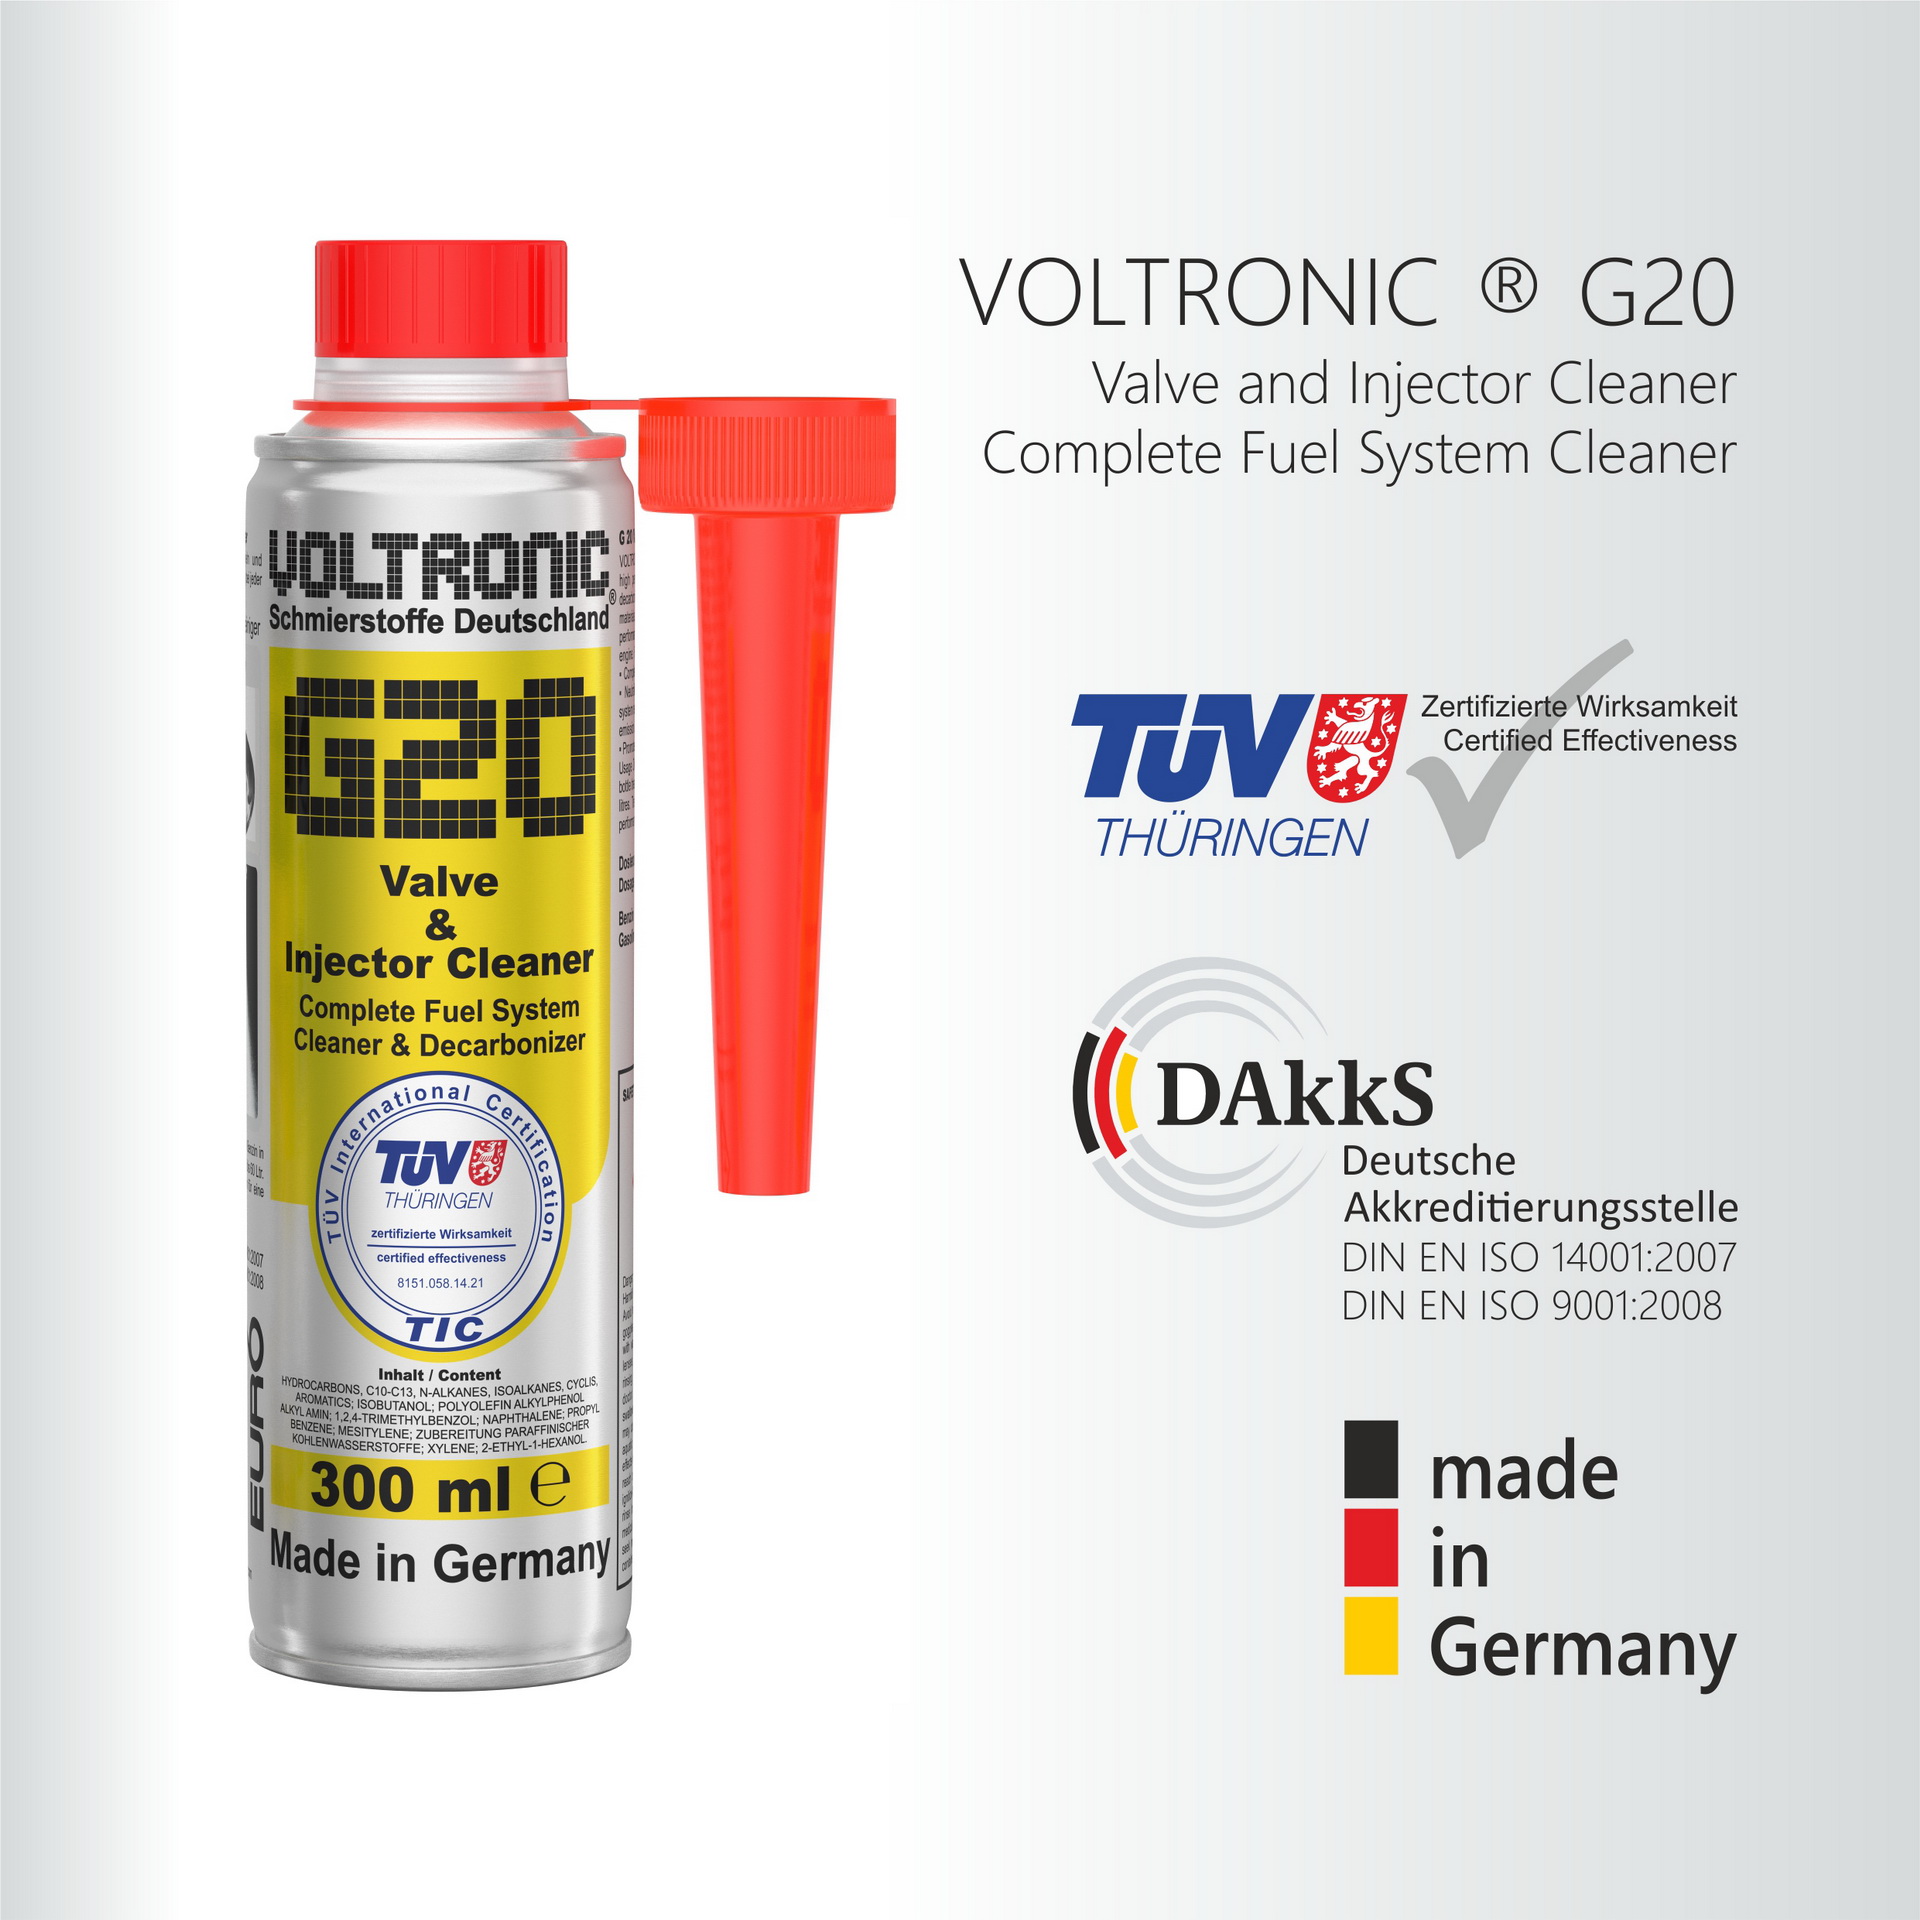 VOLTRONIC® G20 Valve and Injector Cleaner  Lubricant, Motor oil, Additive,  ATF, Gear Oil, Anti-freeze Coolant, Brake Fluid, Car Care and Chemical,  Made in Germany.